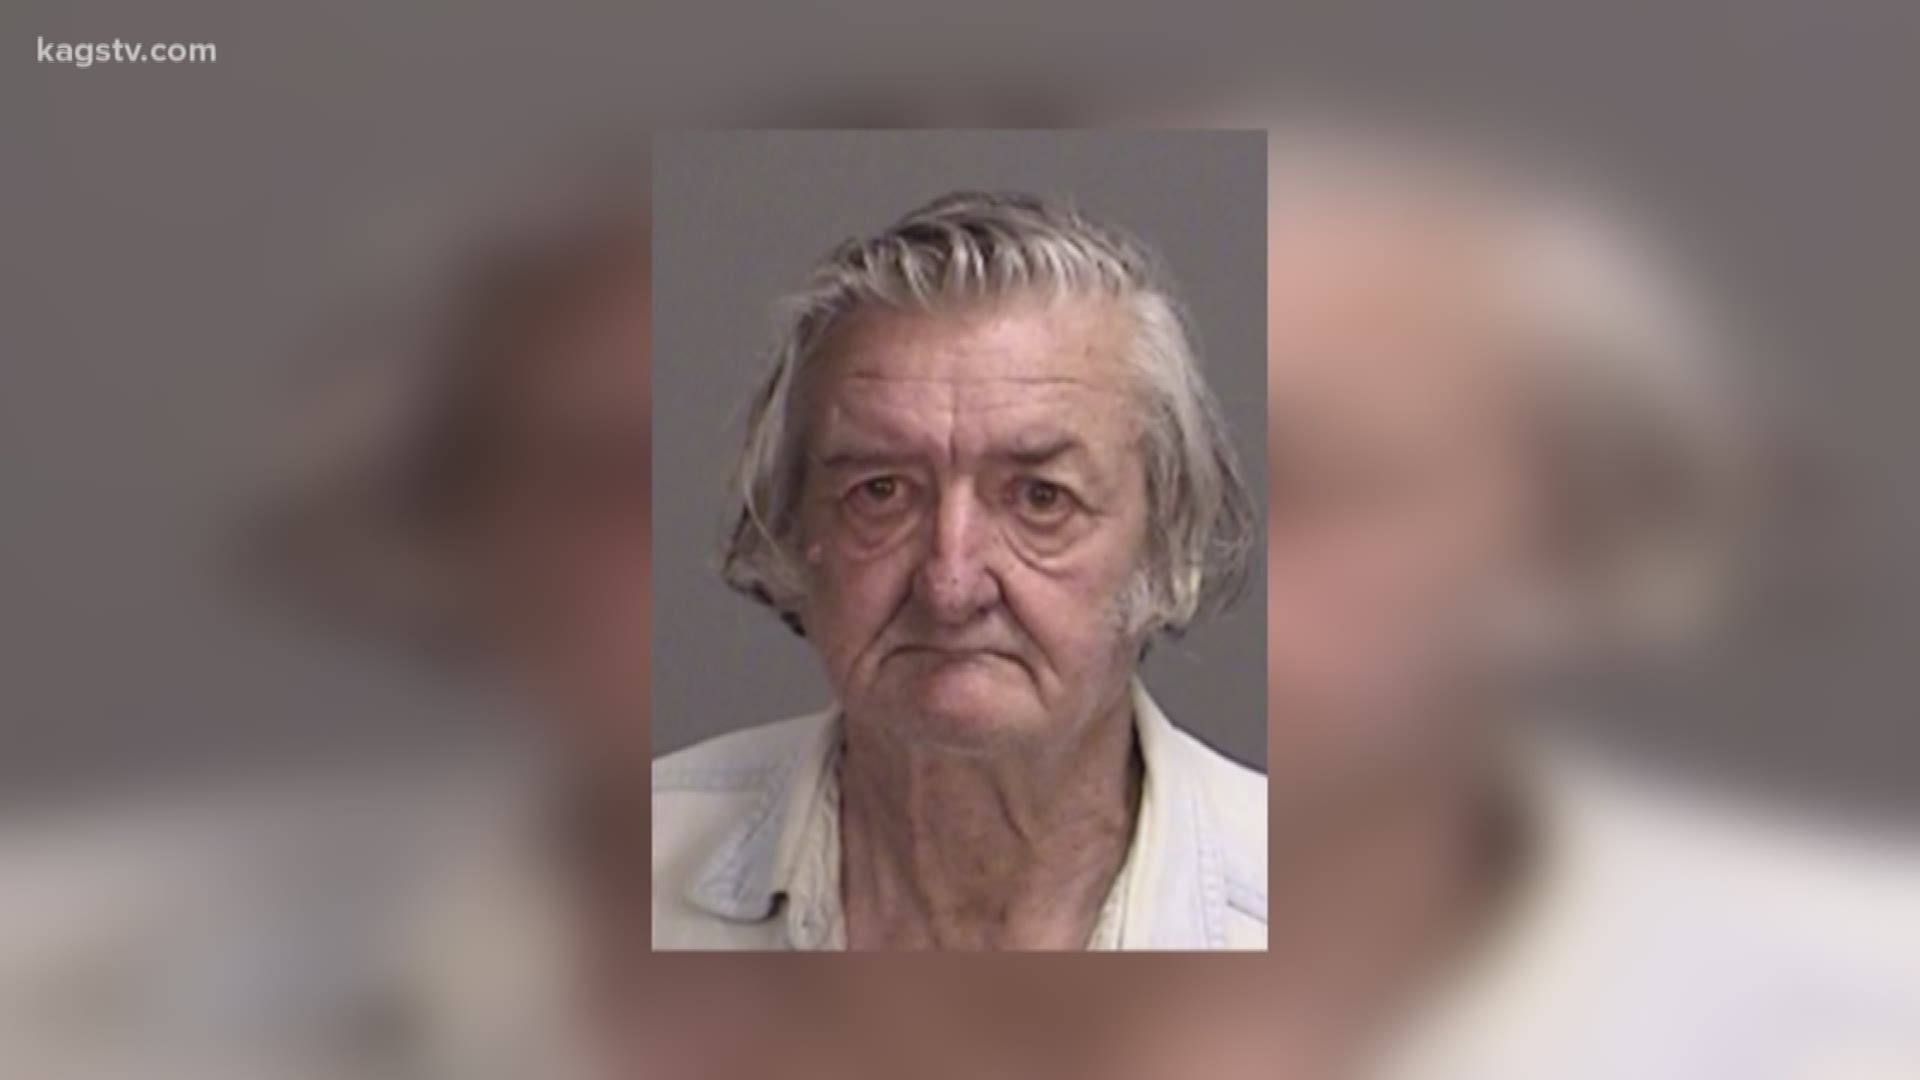 A 65-year-old Bryan man was arrested after beating his neighbor with a bat for "driving him crazy."